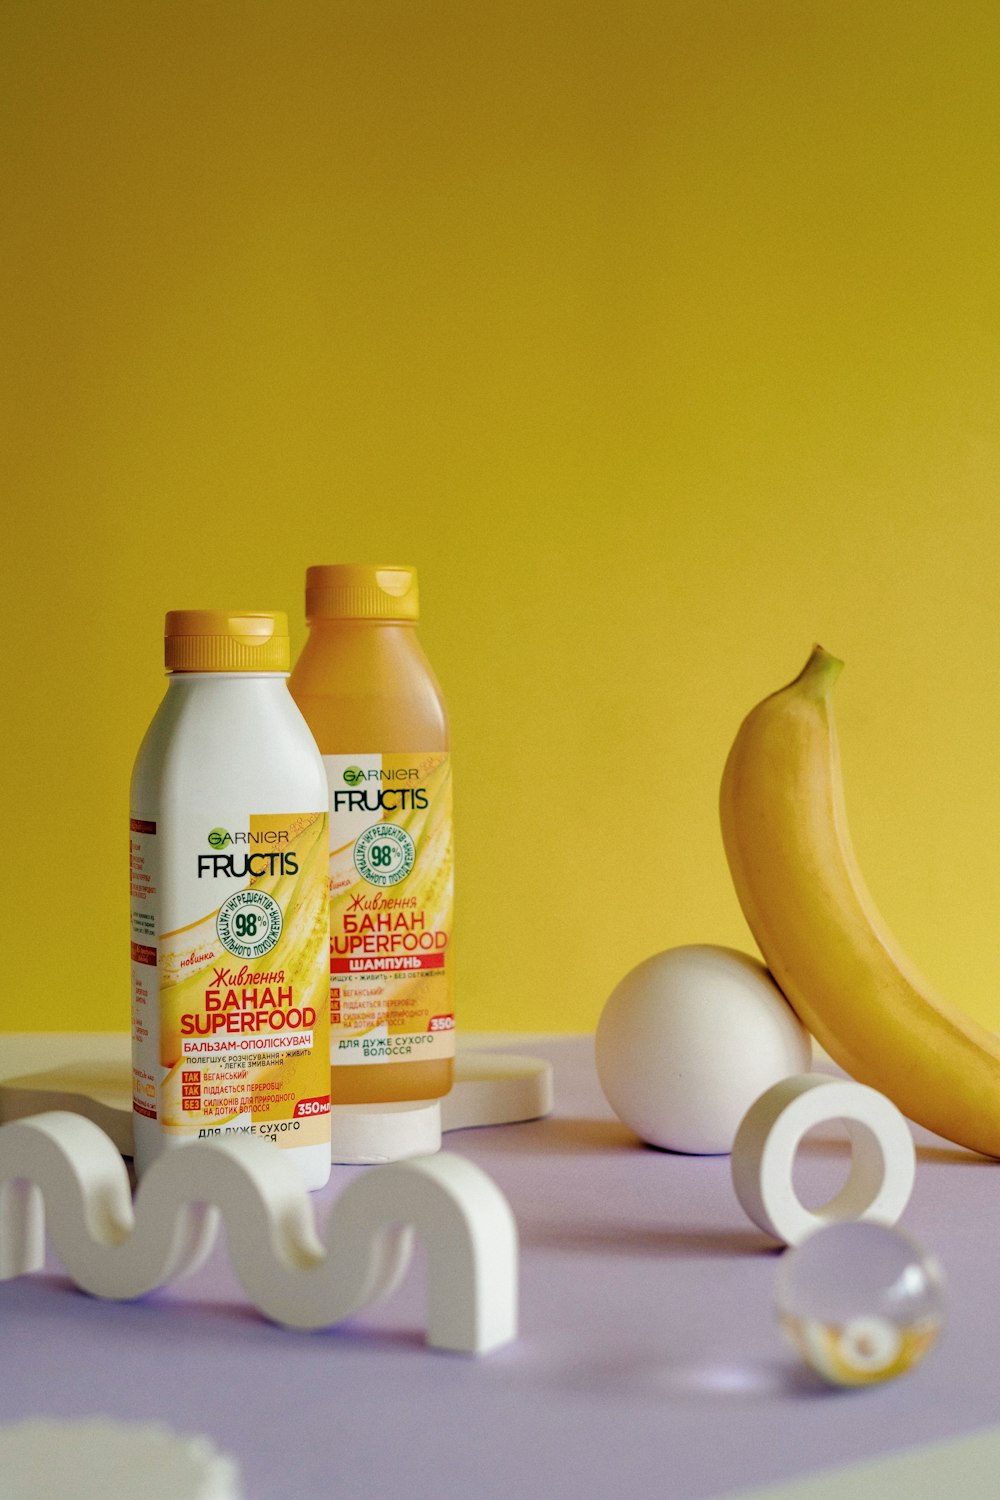 a banana, eggs, and two bottles of juice on a table